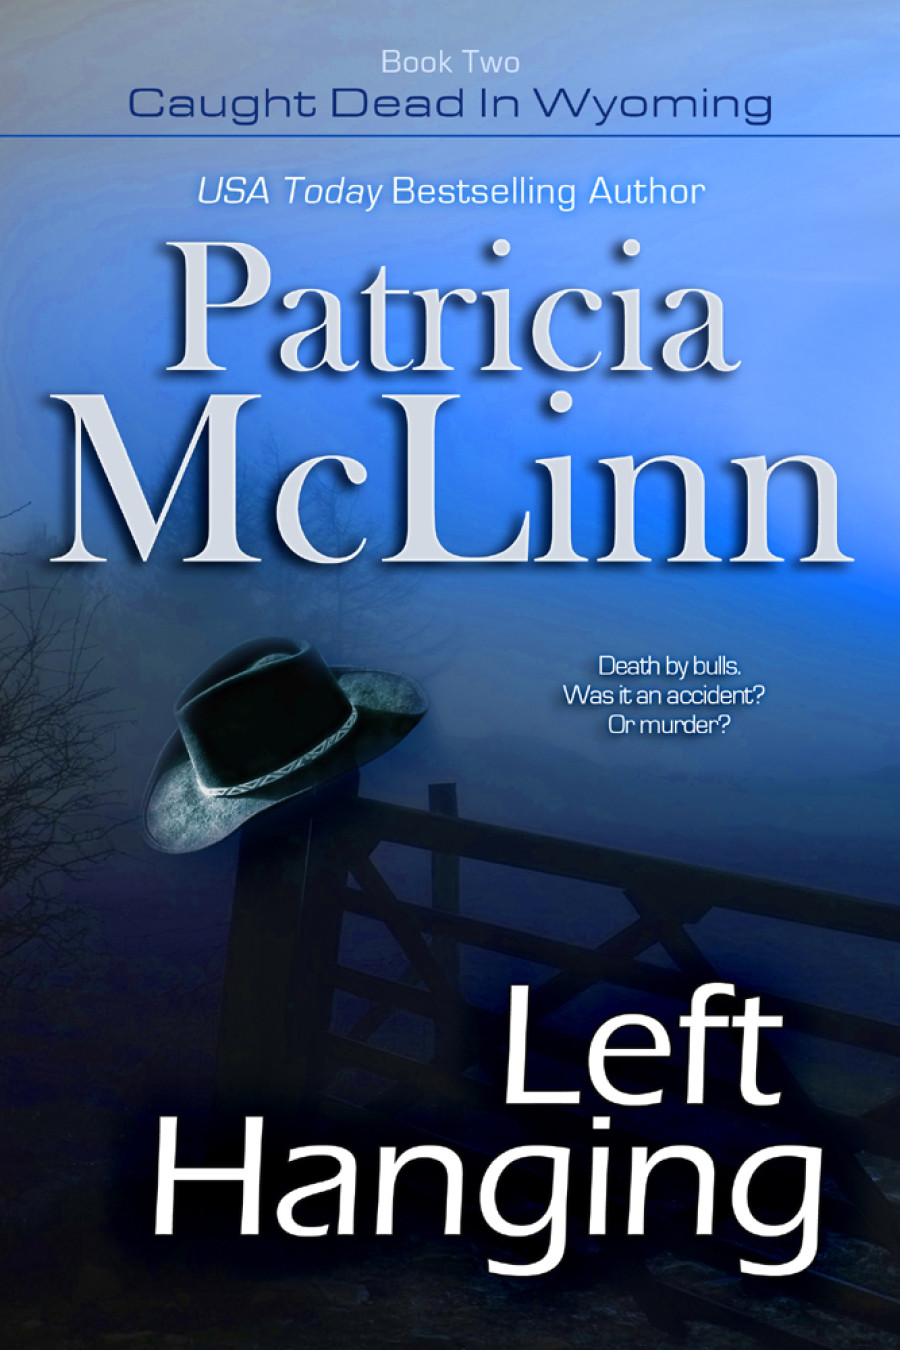 Left Hanging by Patricia McLinn